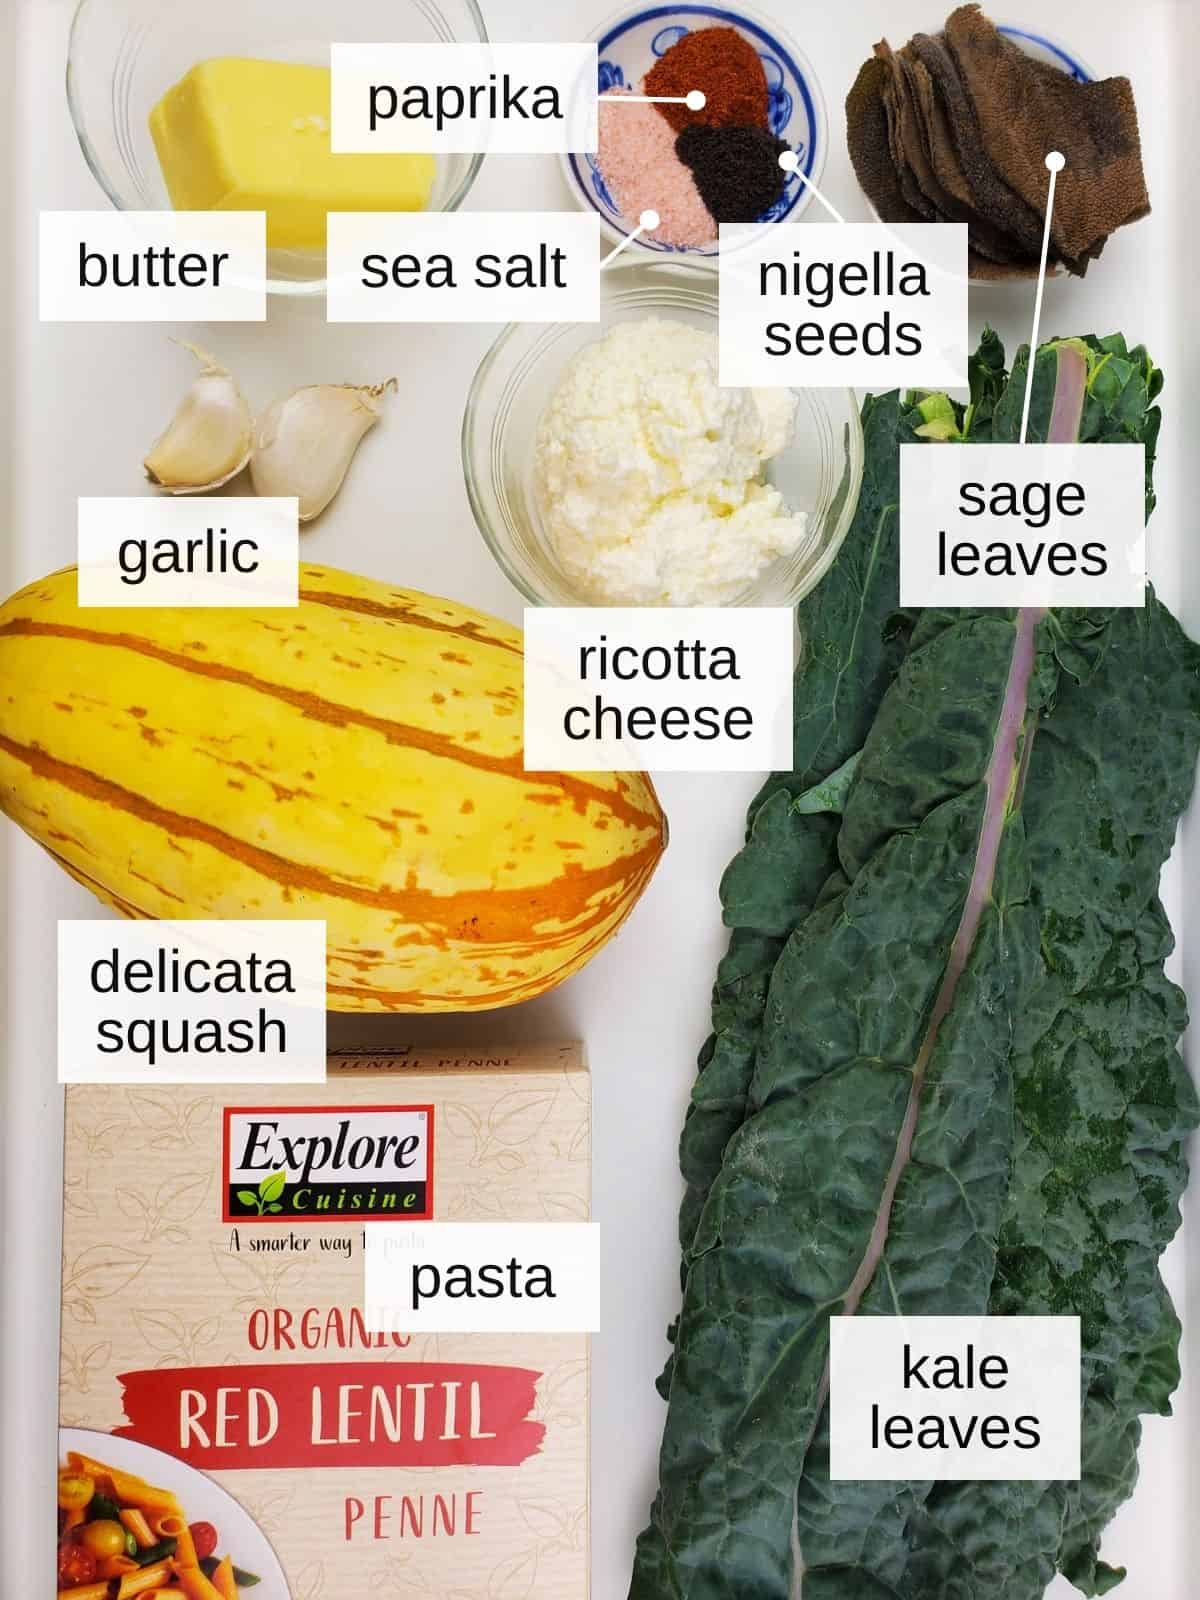 ingredients for delicata squash pasta, including paprika, butter, sea salt, nigella seeds, sage leaves, garlic, ricotta cheese, pasta, kale leaves, and delicata squash.